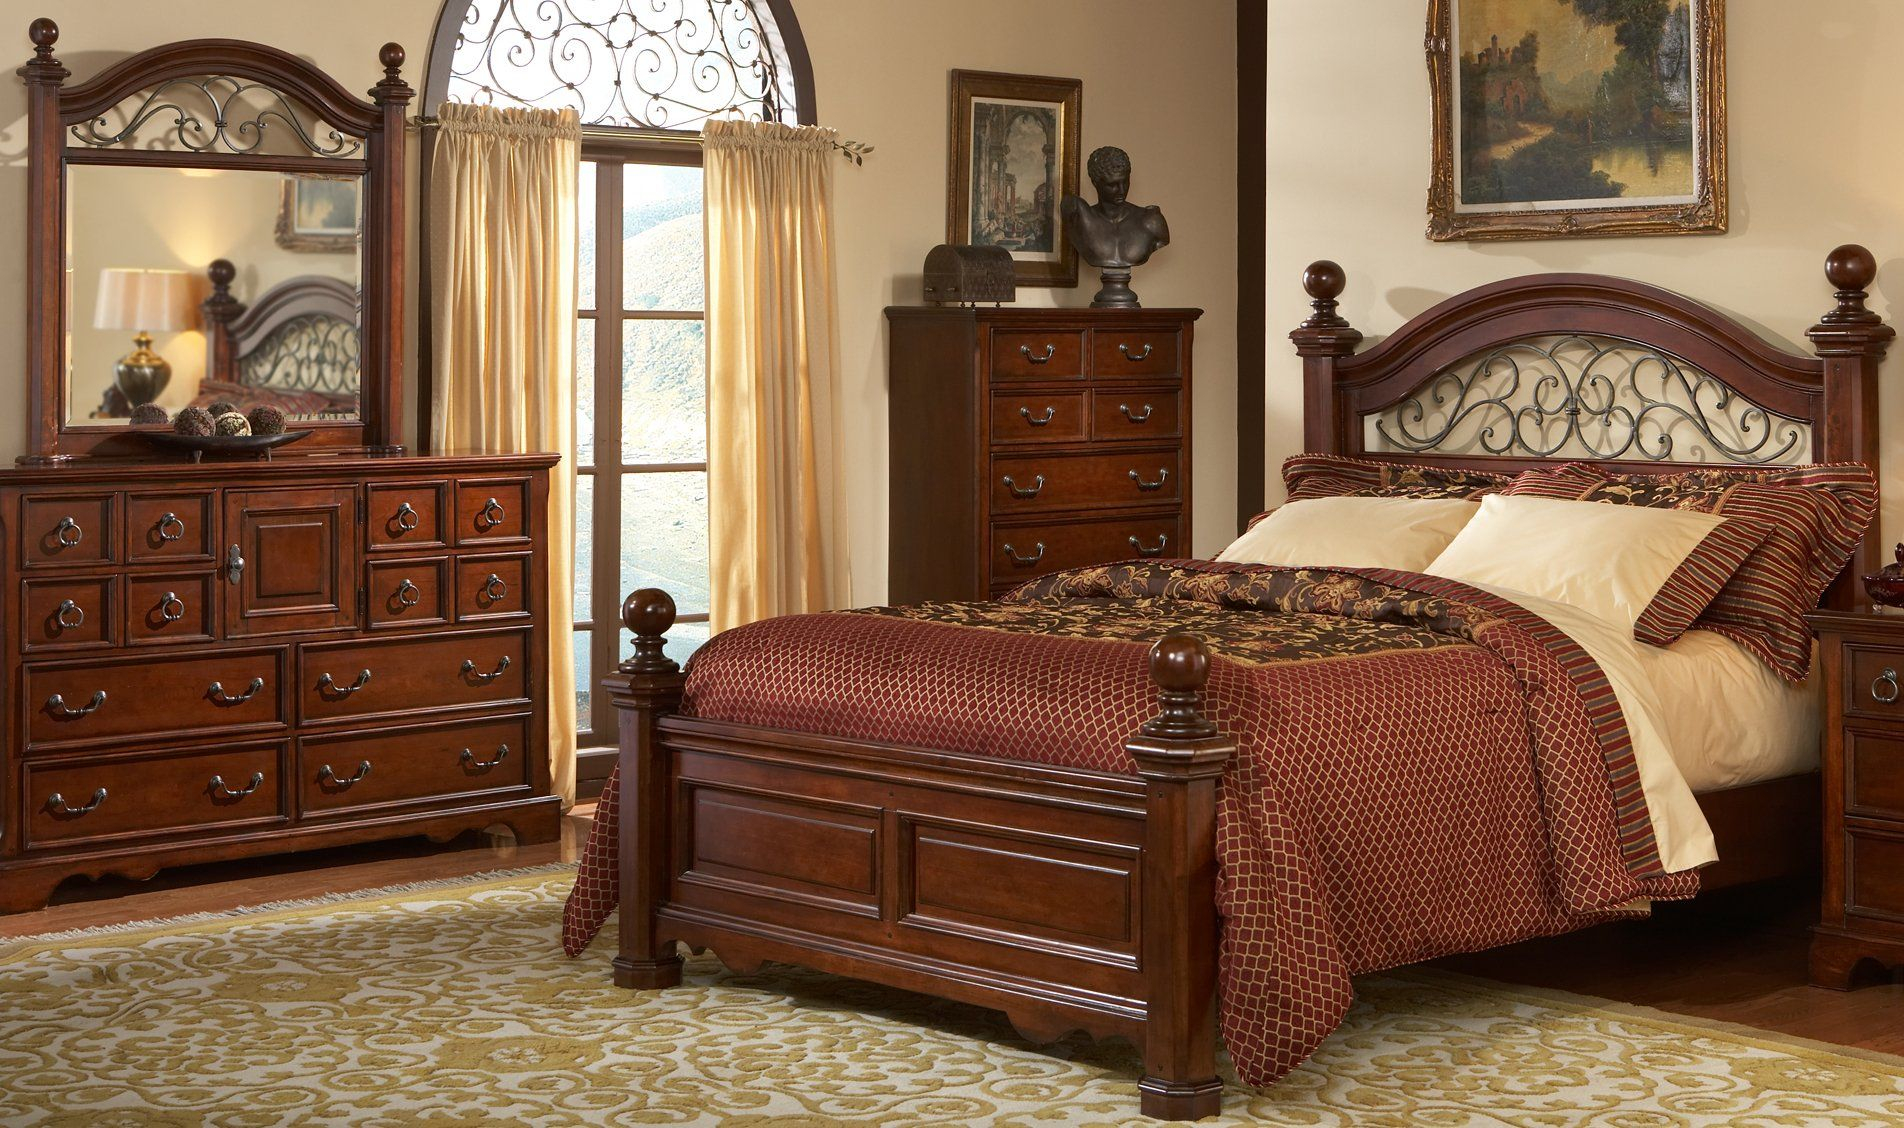 walnut and wrought iron bedroom furniture